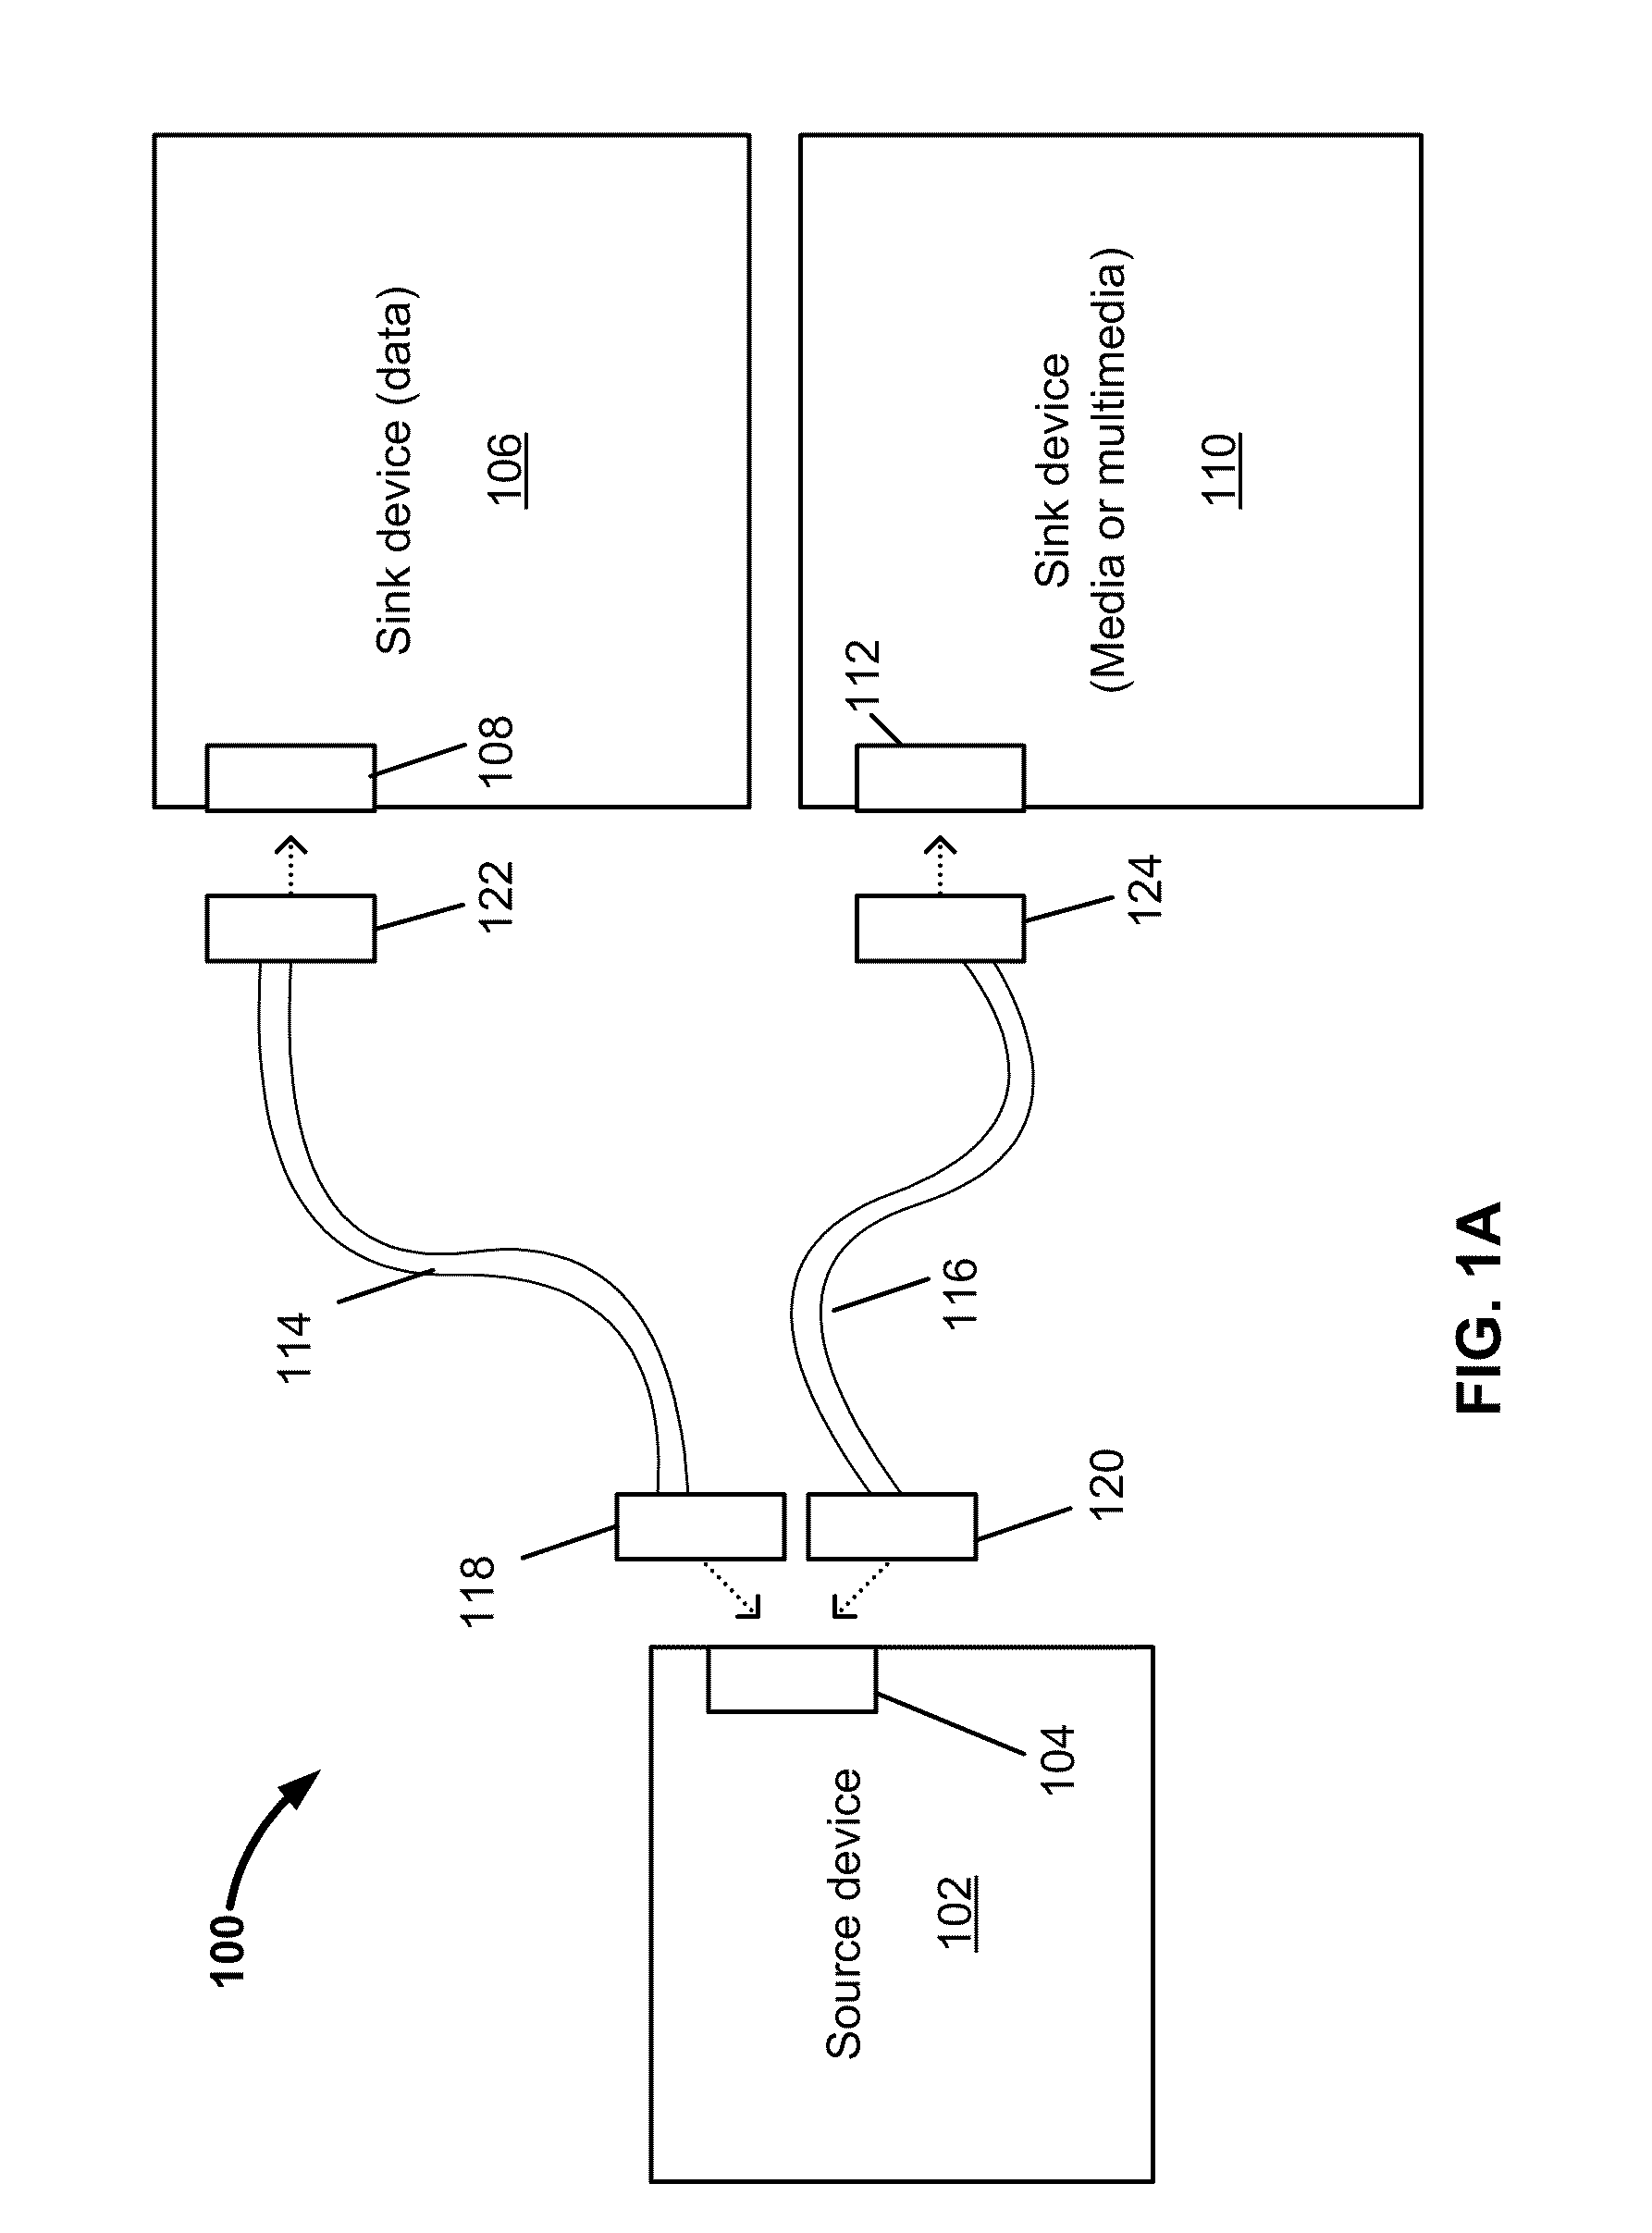 Dual-Mode Data Transfer of Uncompressed Multimedia Contents or Data Communications